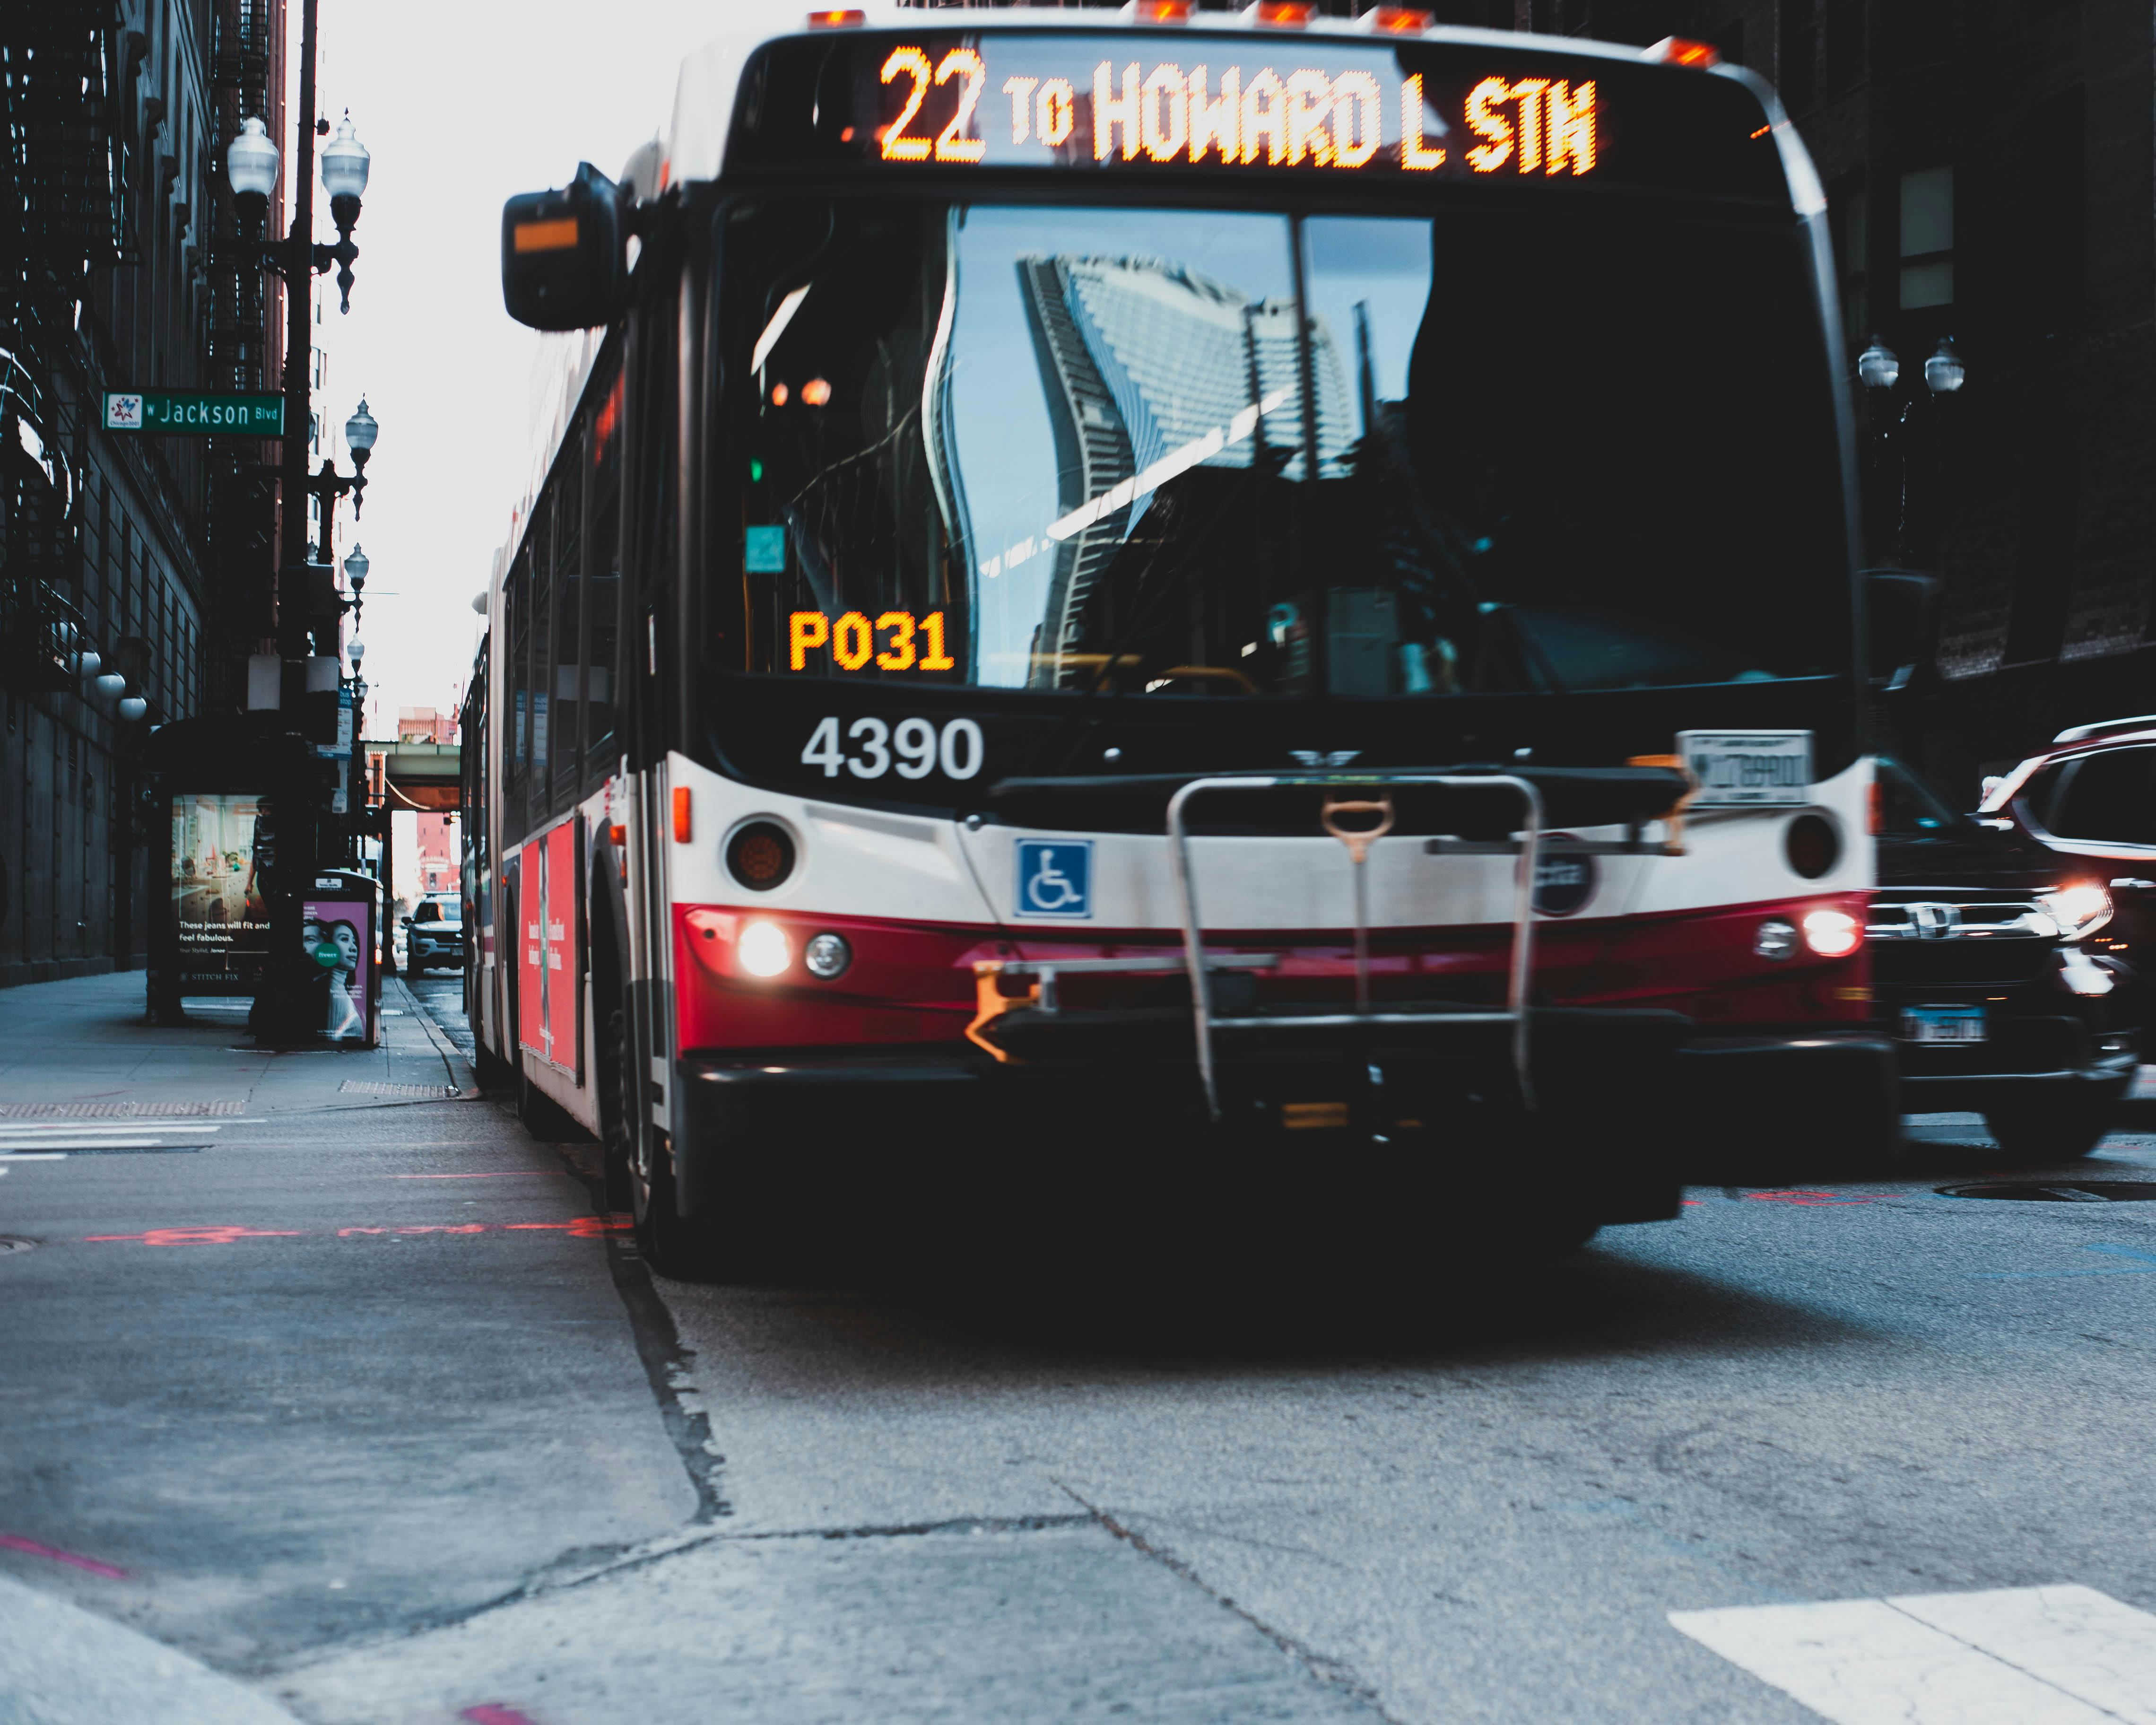 Red and white bus on the road. | Photo: Pexels